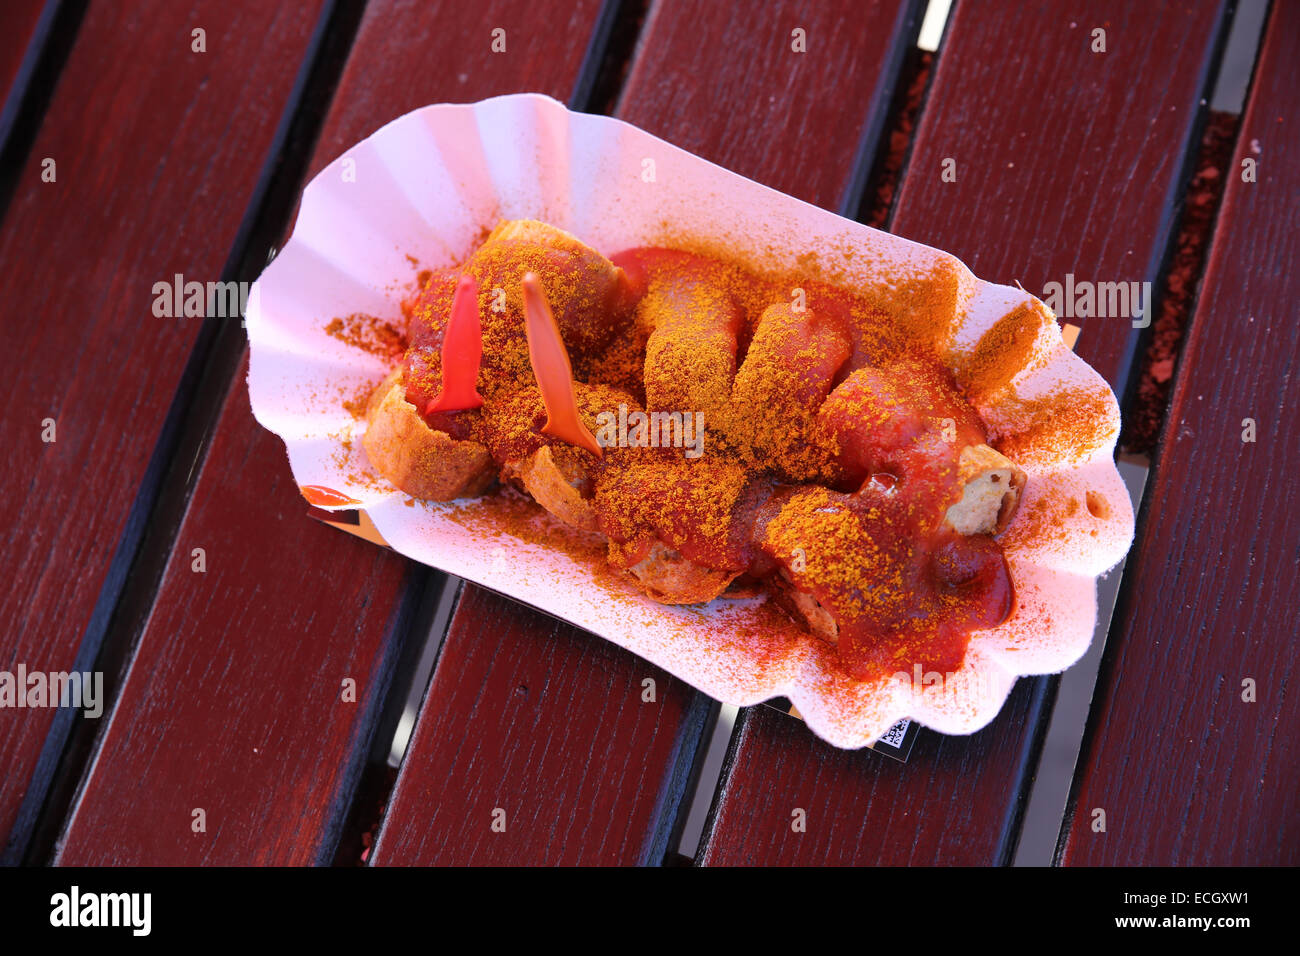 German curry wurst picnic table Stock Photo